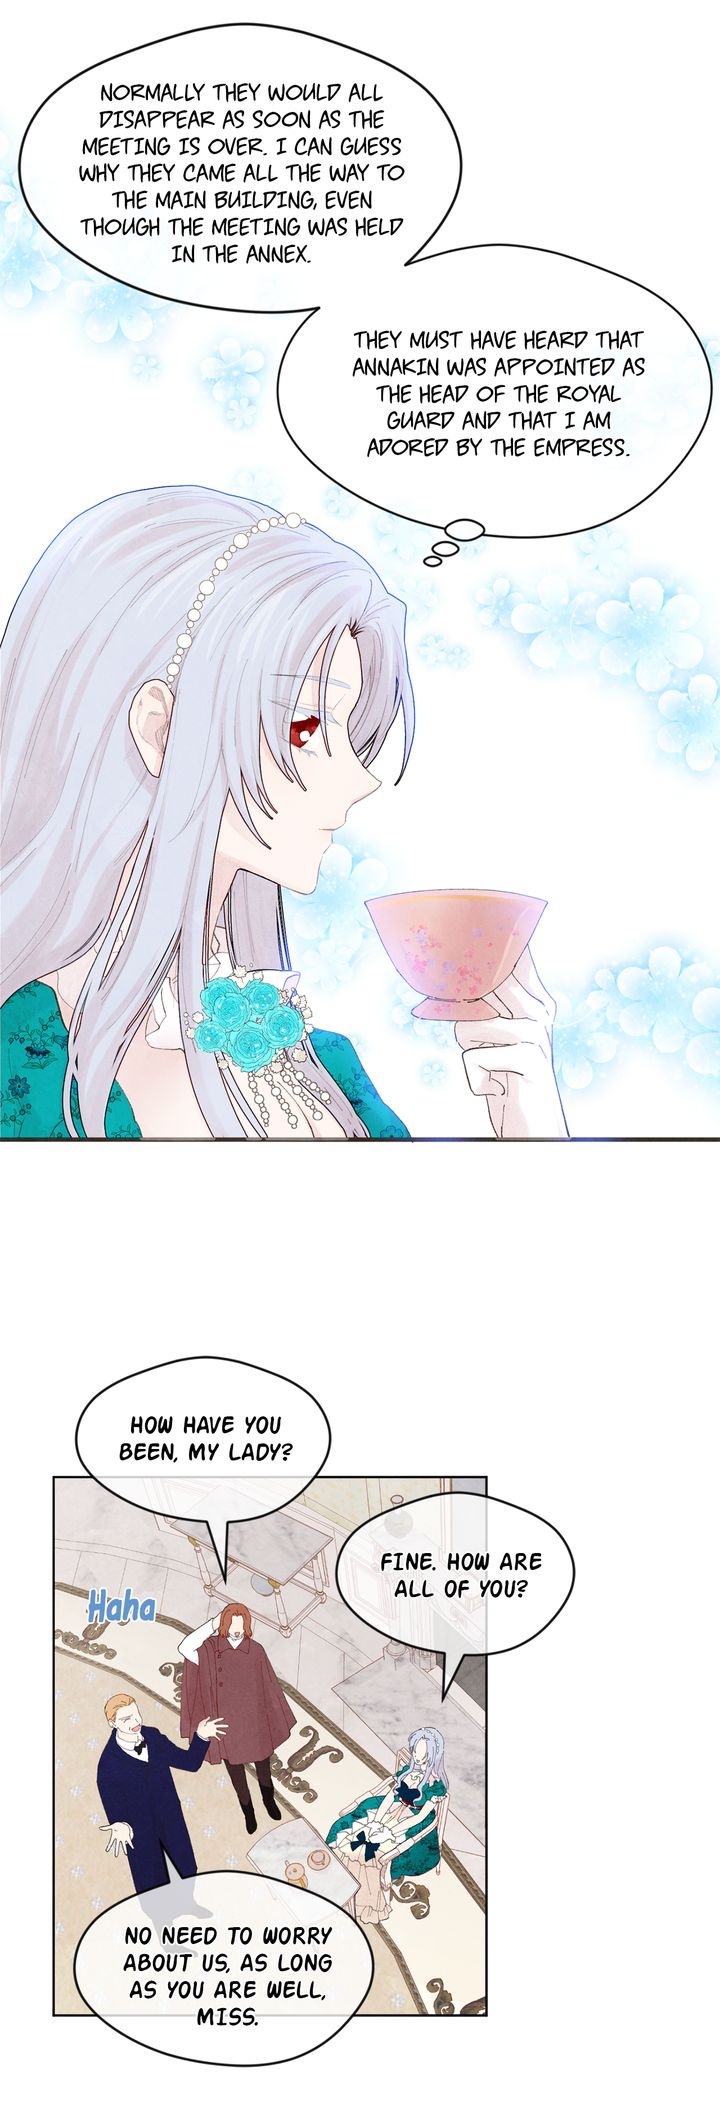 Iris - Lady With A Smartphone Chapter 39